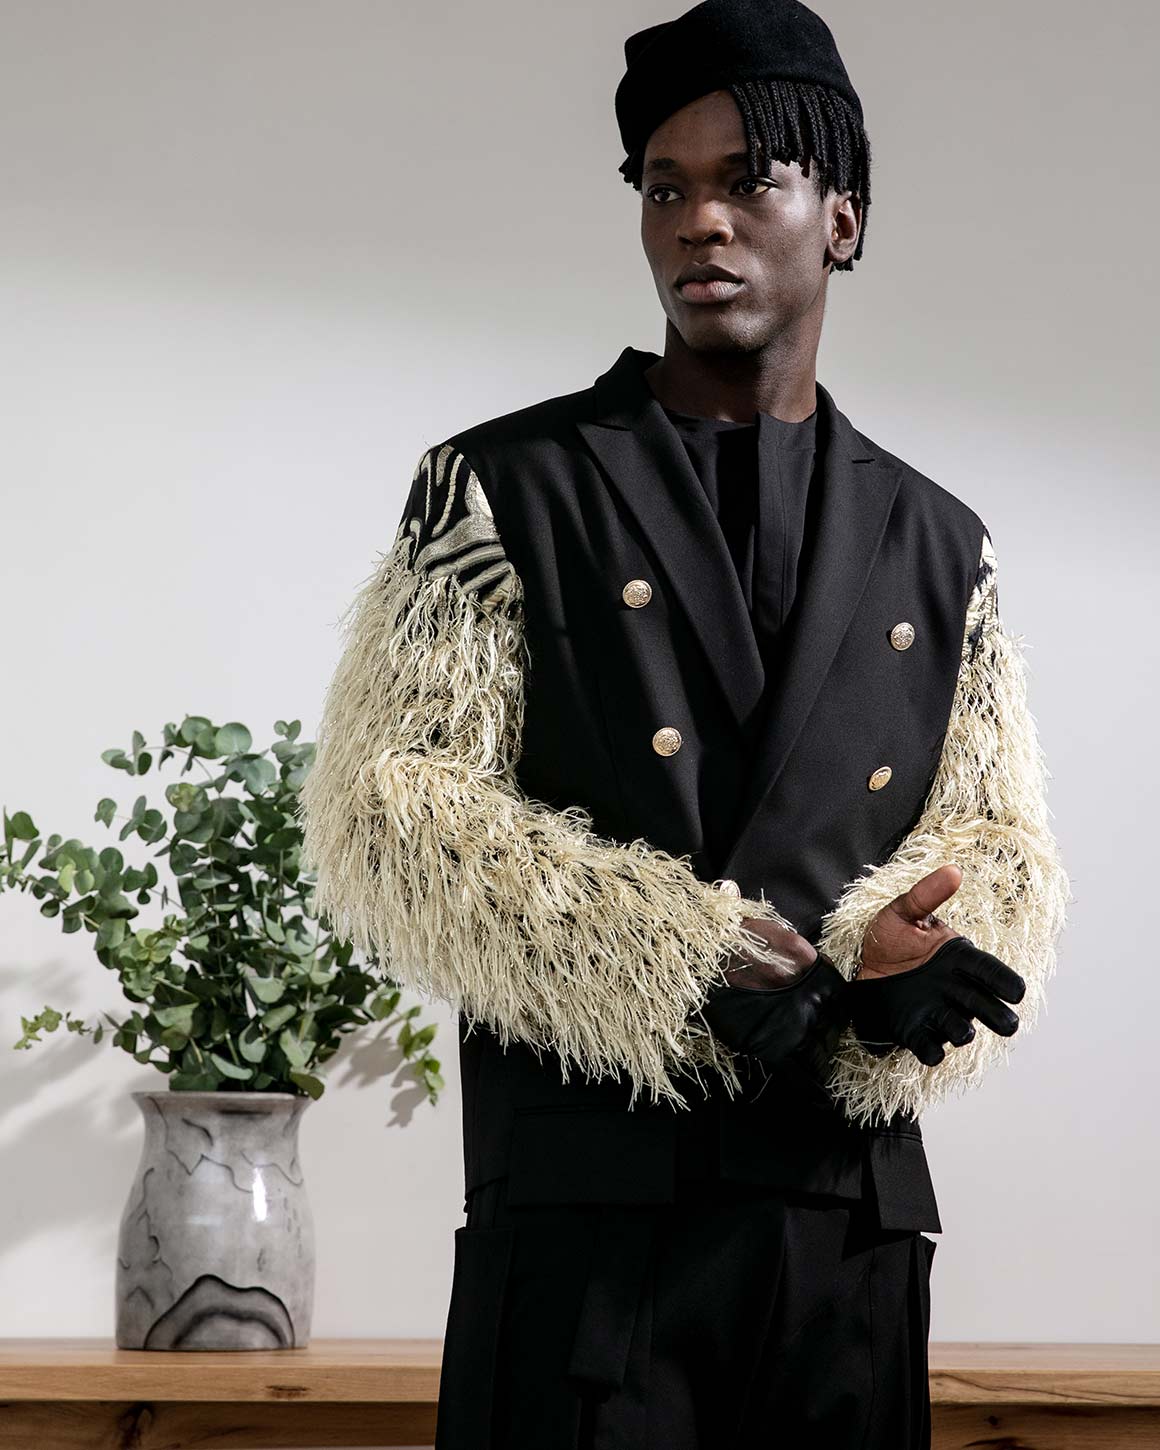 Ludovic Couture Jacket